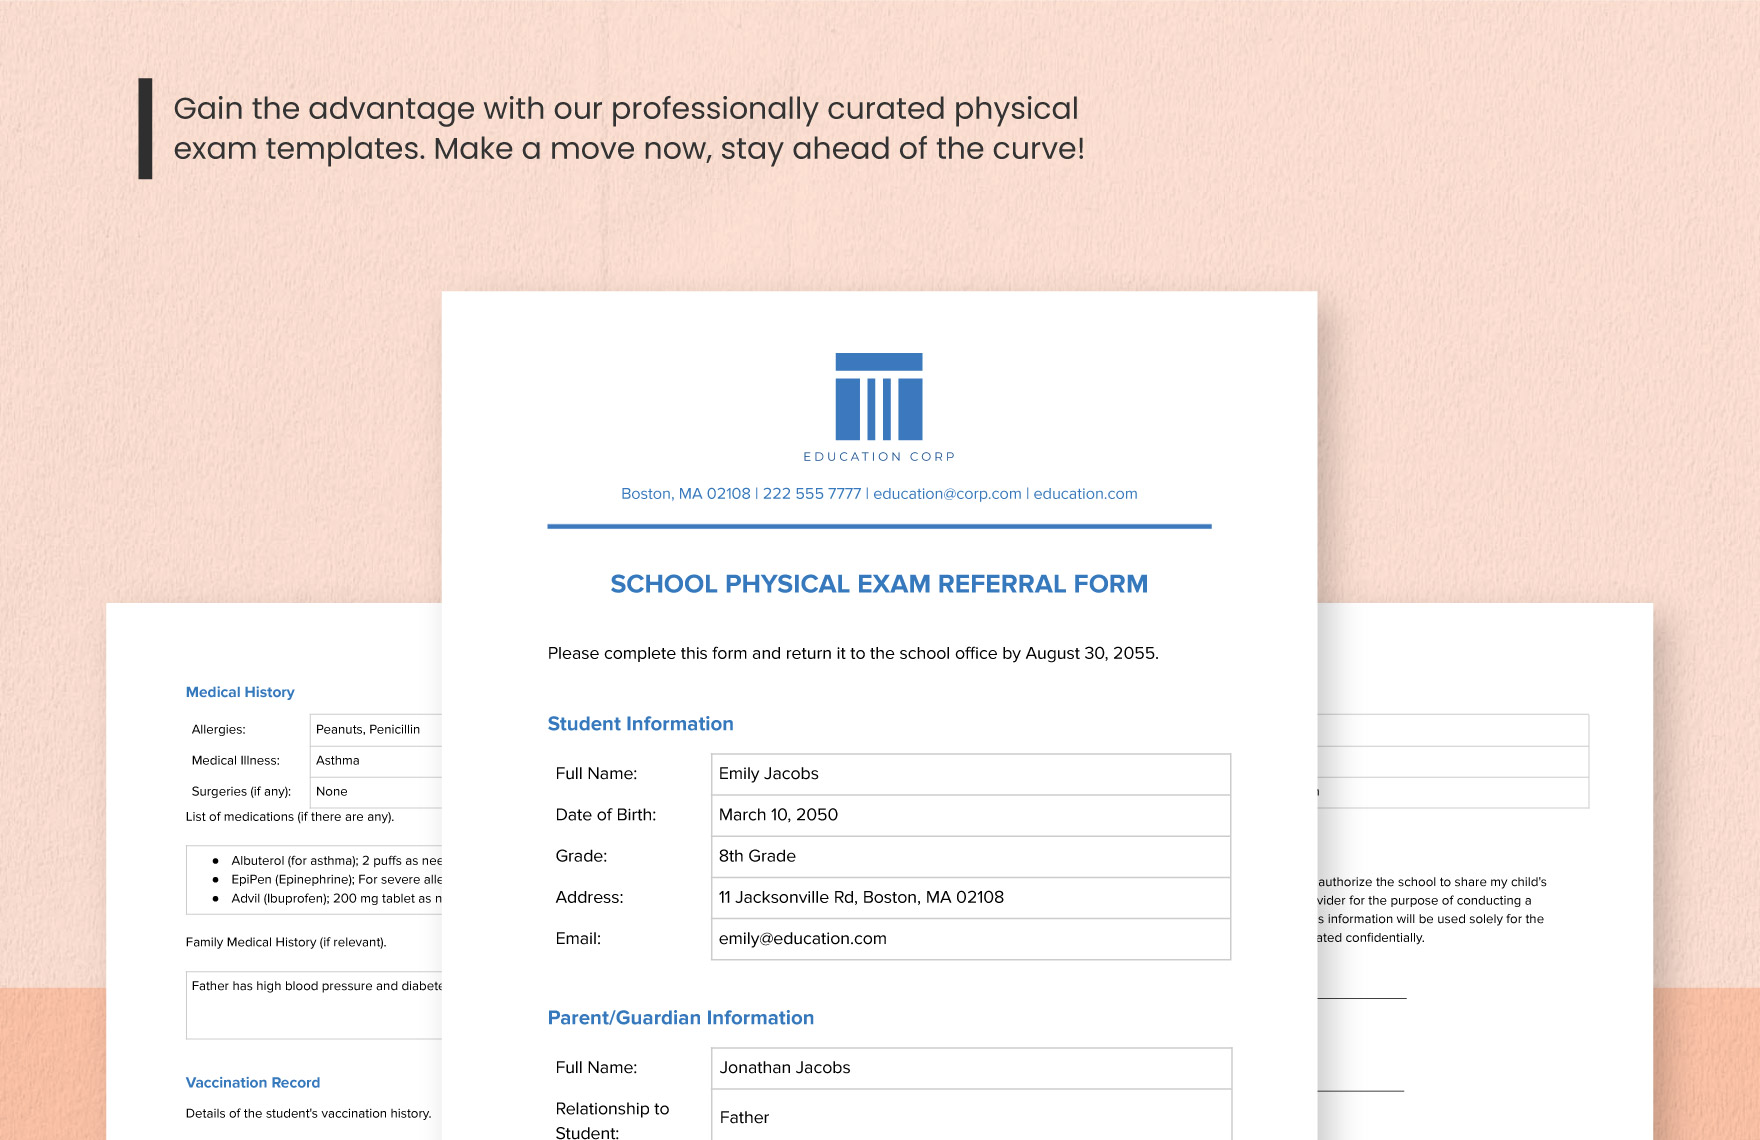 School Physical Exam Referral Form Template